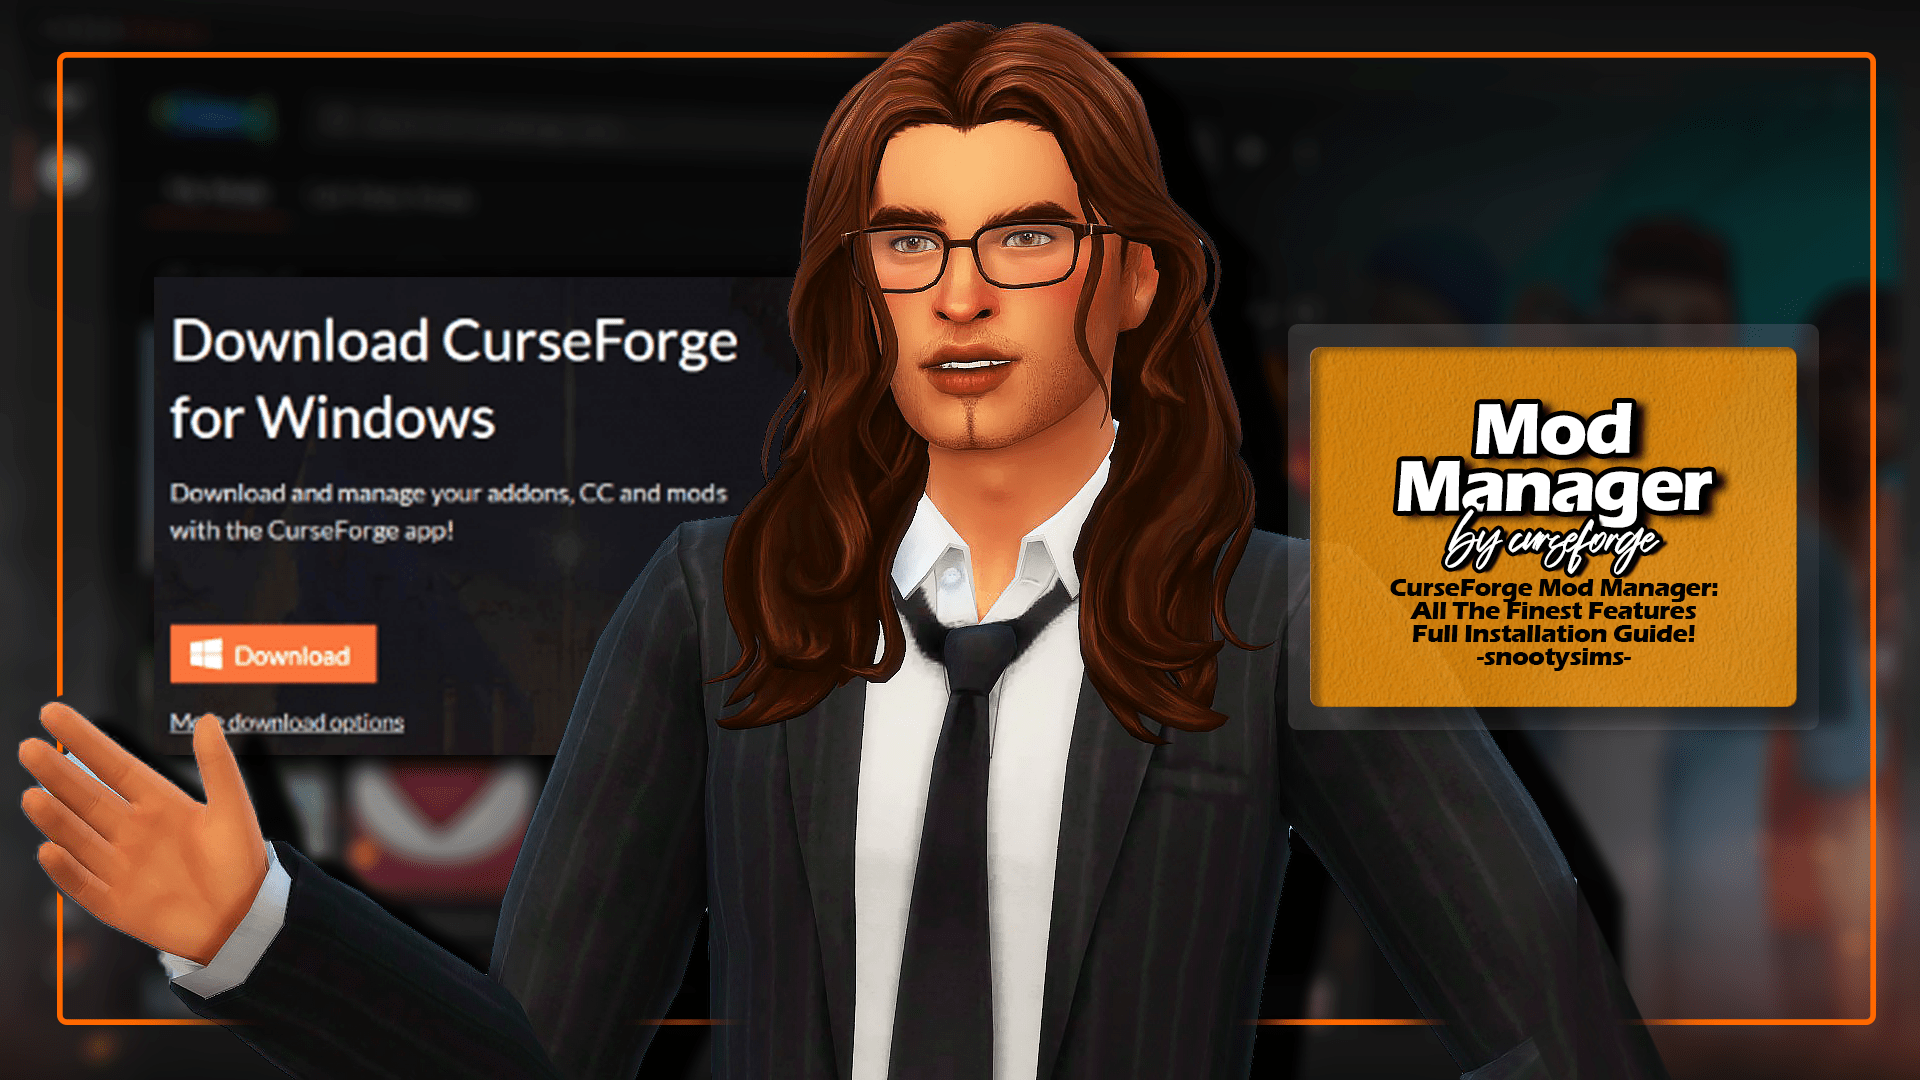 Sims 4 and CurseForge – Crinrict's Sims 4 Help Blog